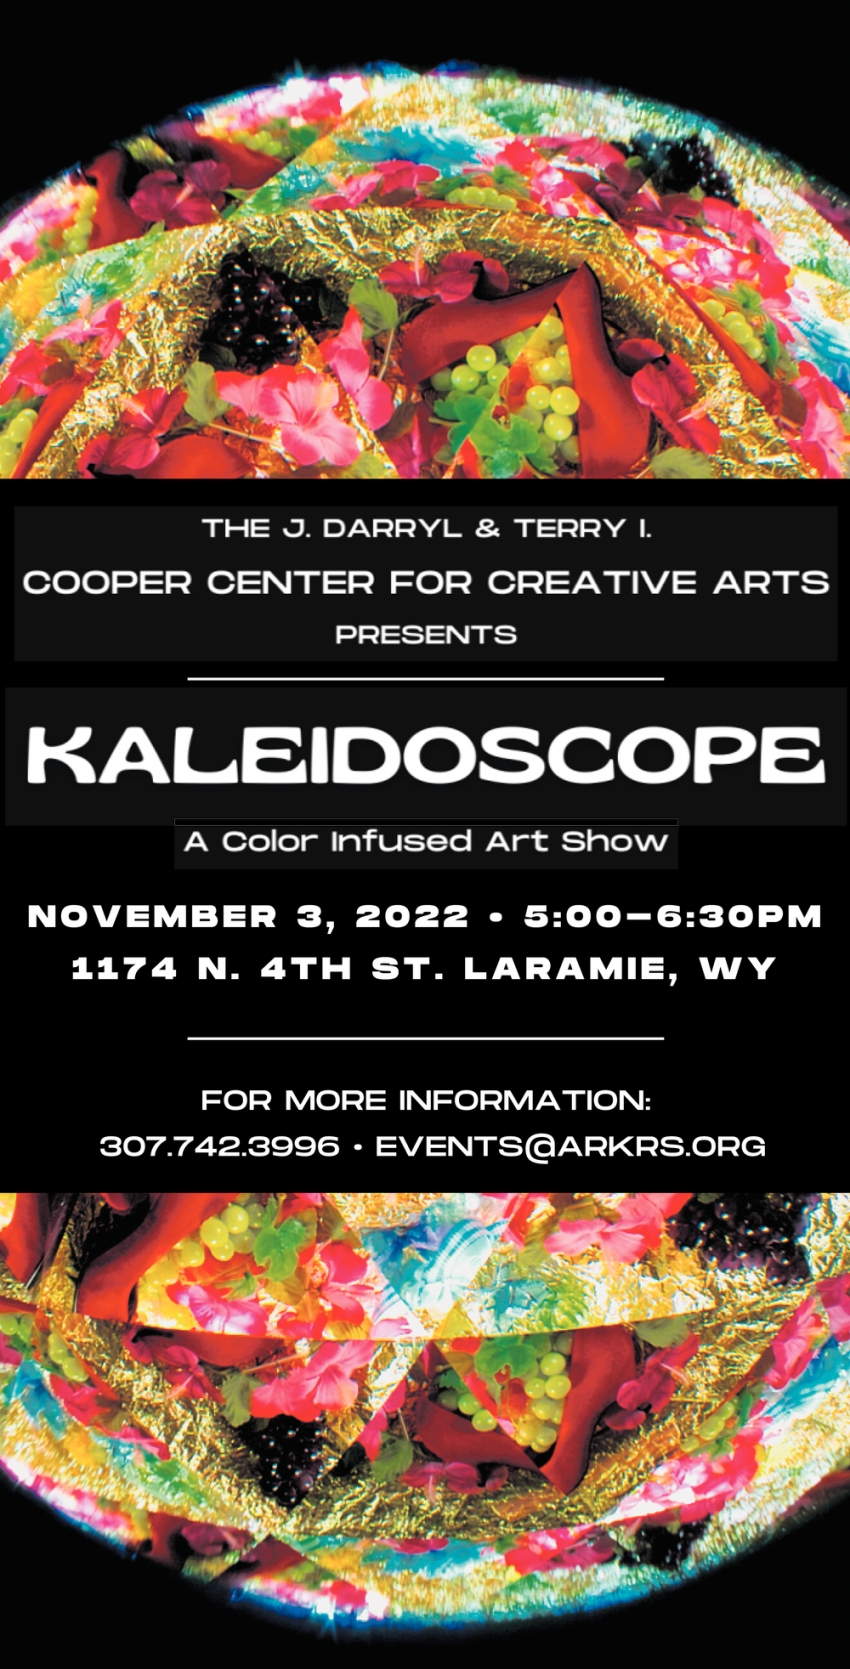 A Color Infused Art Show